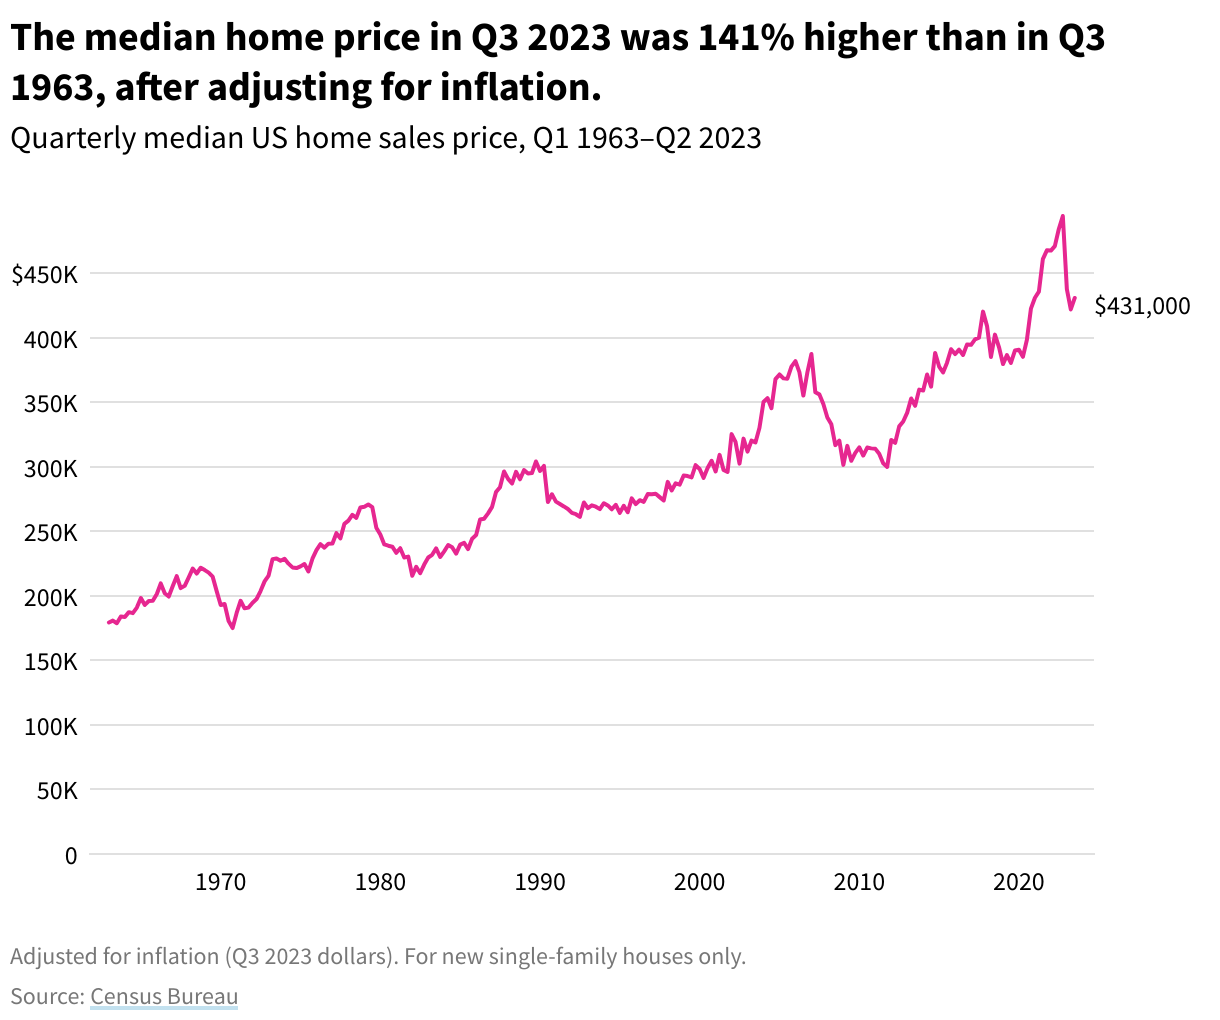 Median annual home price, Q3 1963 to Q3 2023, adjusted for inflation, 2023 dollars.  The median home price in Q3 2023 was 141% higher than in Q3 1963, after adjusting for inflation.